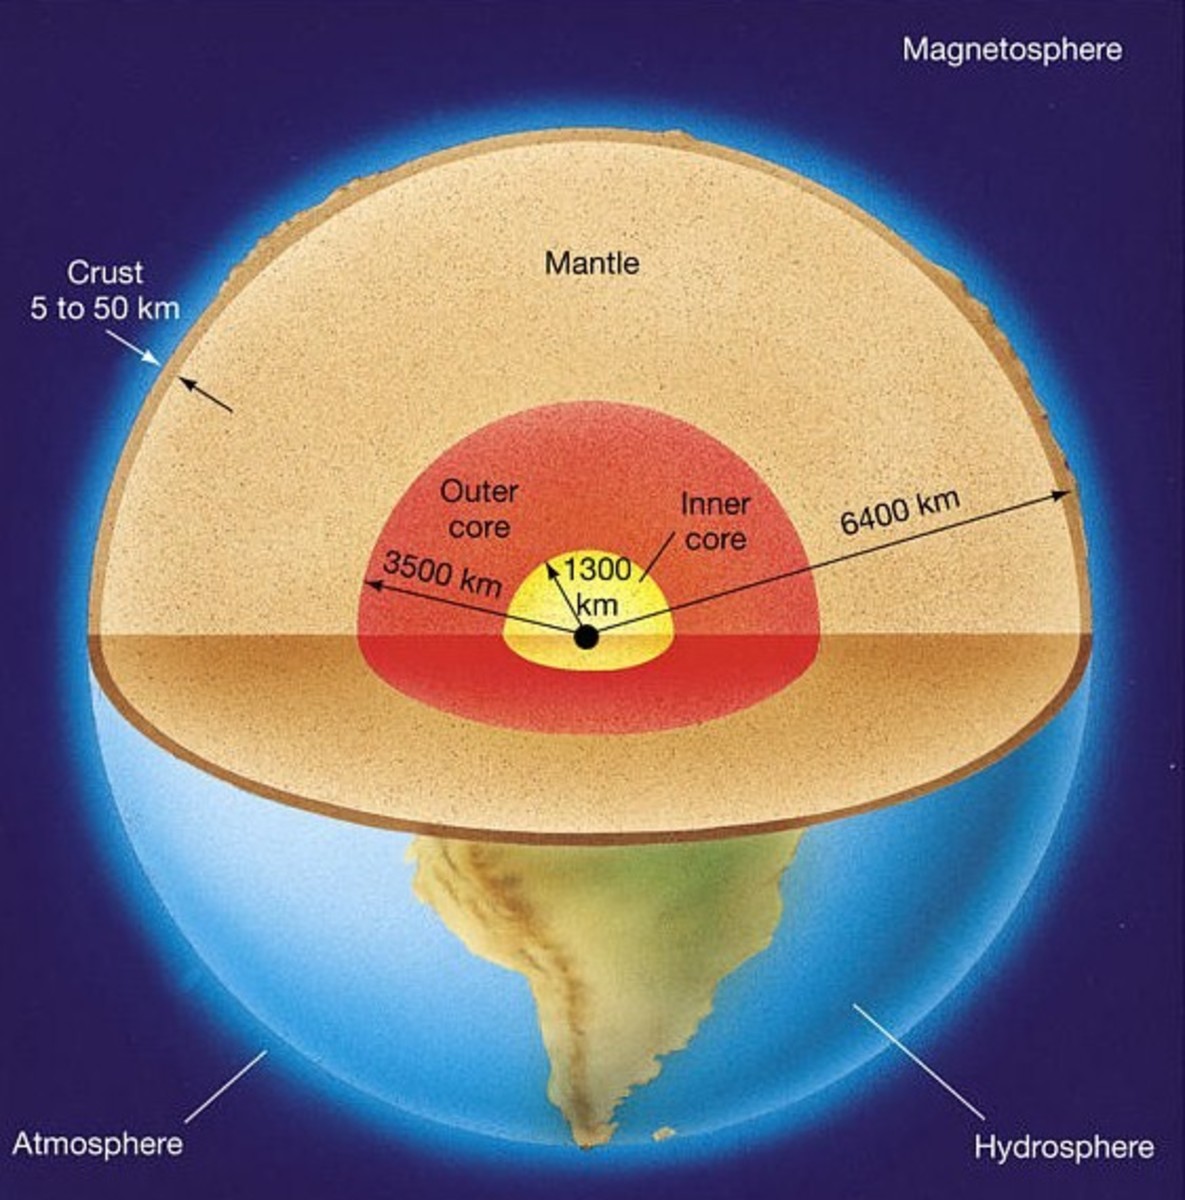 Cross sectional view of the Earth